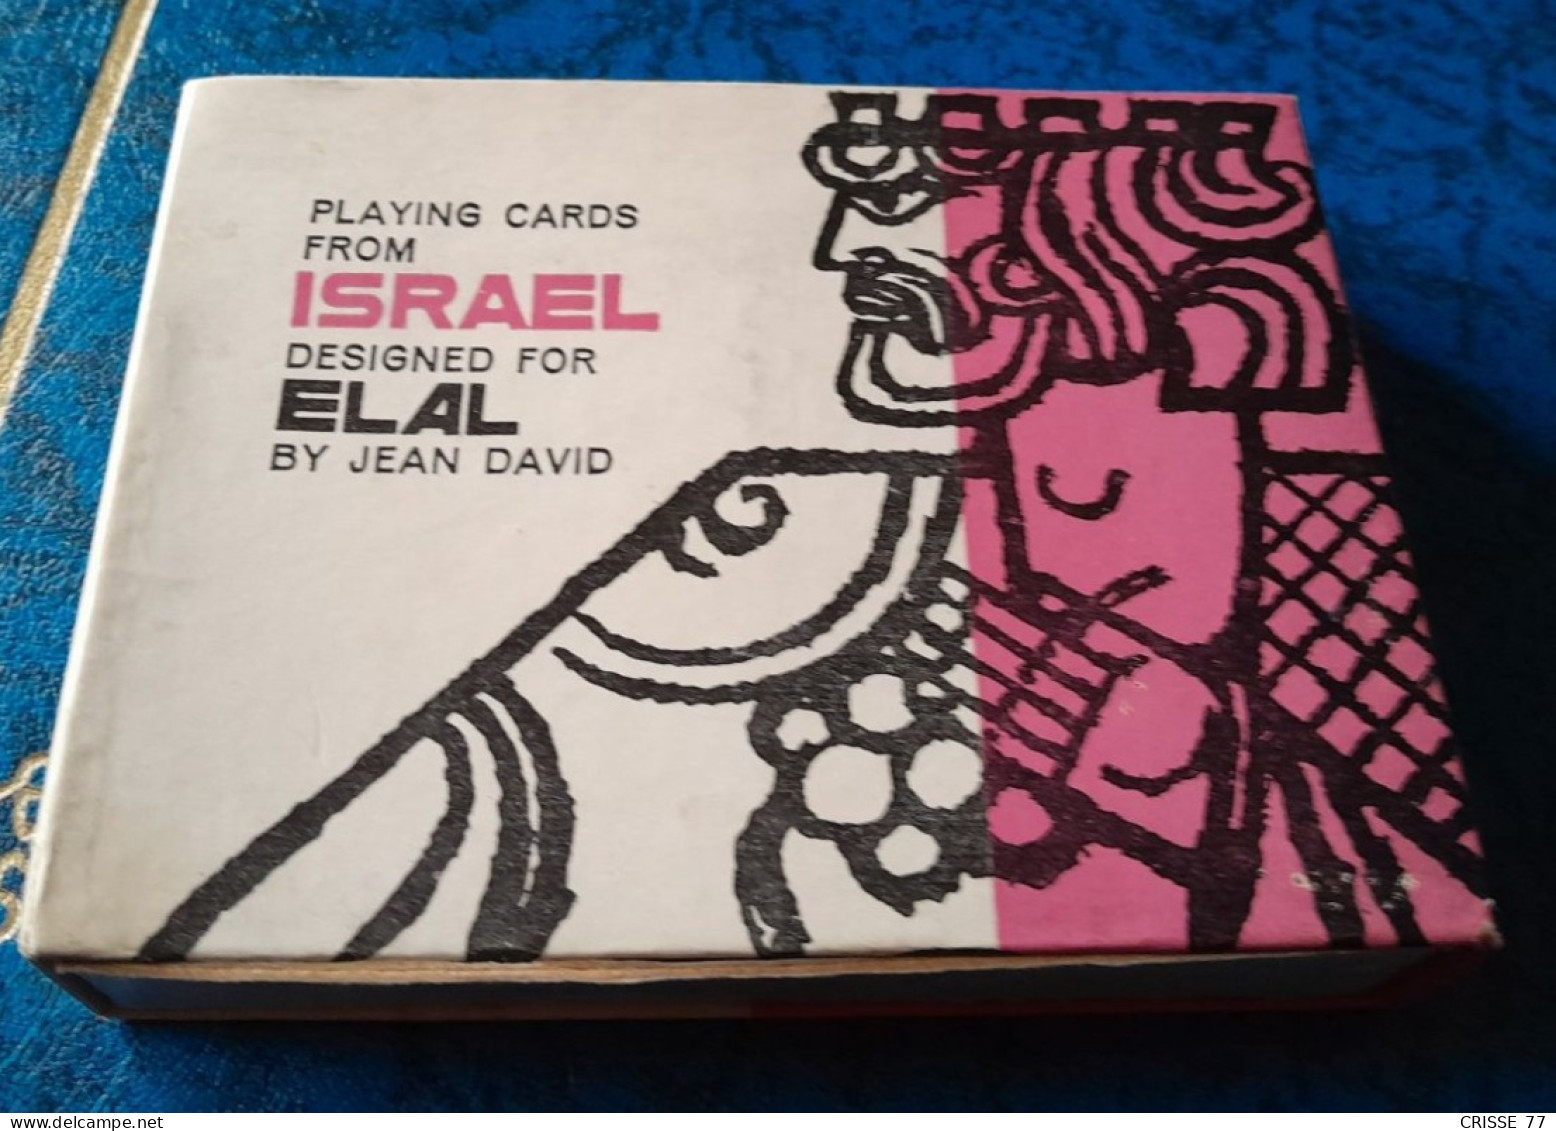 Playing Card From Israel Designed For ELAL By Jean David   Coffret étui  De Cartes A Jouer - Barajas De Naipe